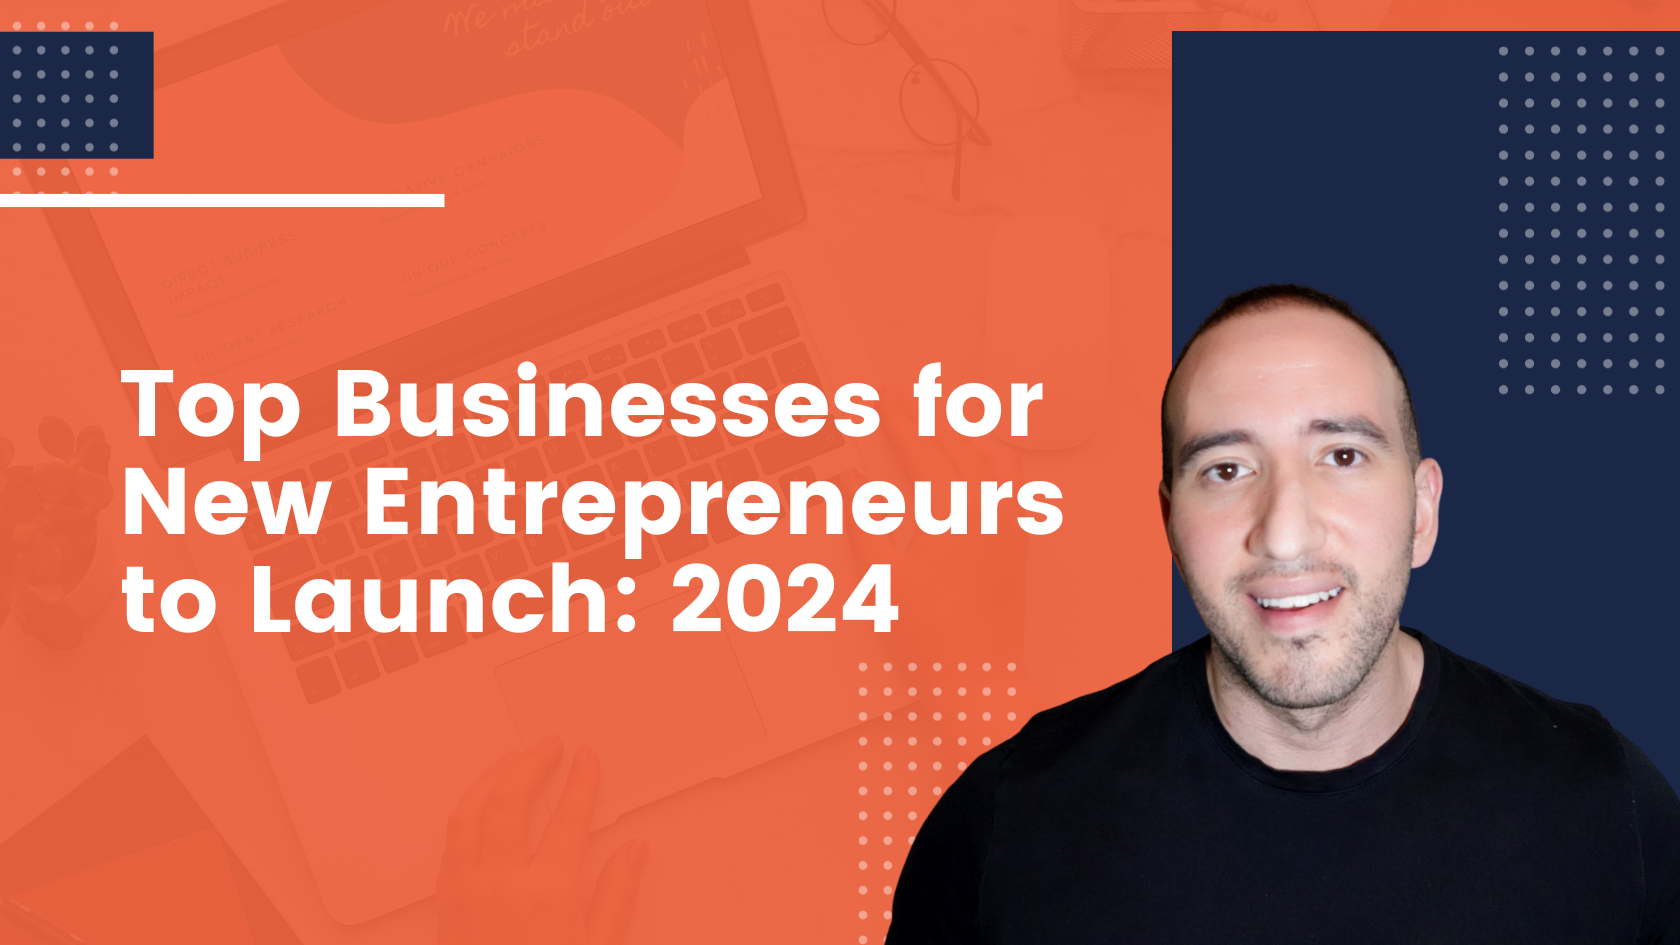 Discover the Top Businesses for New Entrepreneurs to Launch in 2024